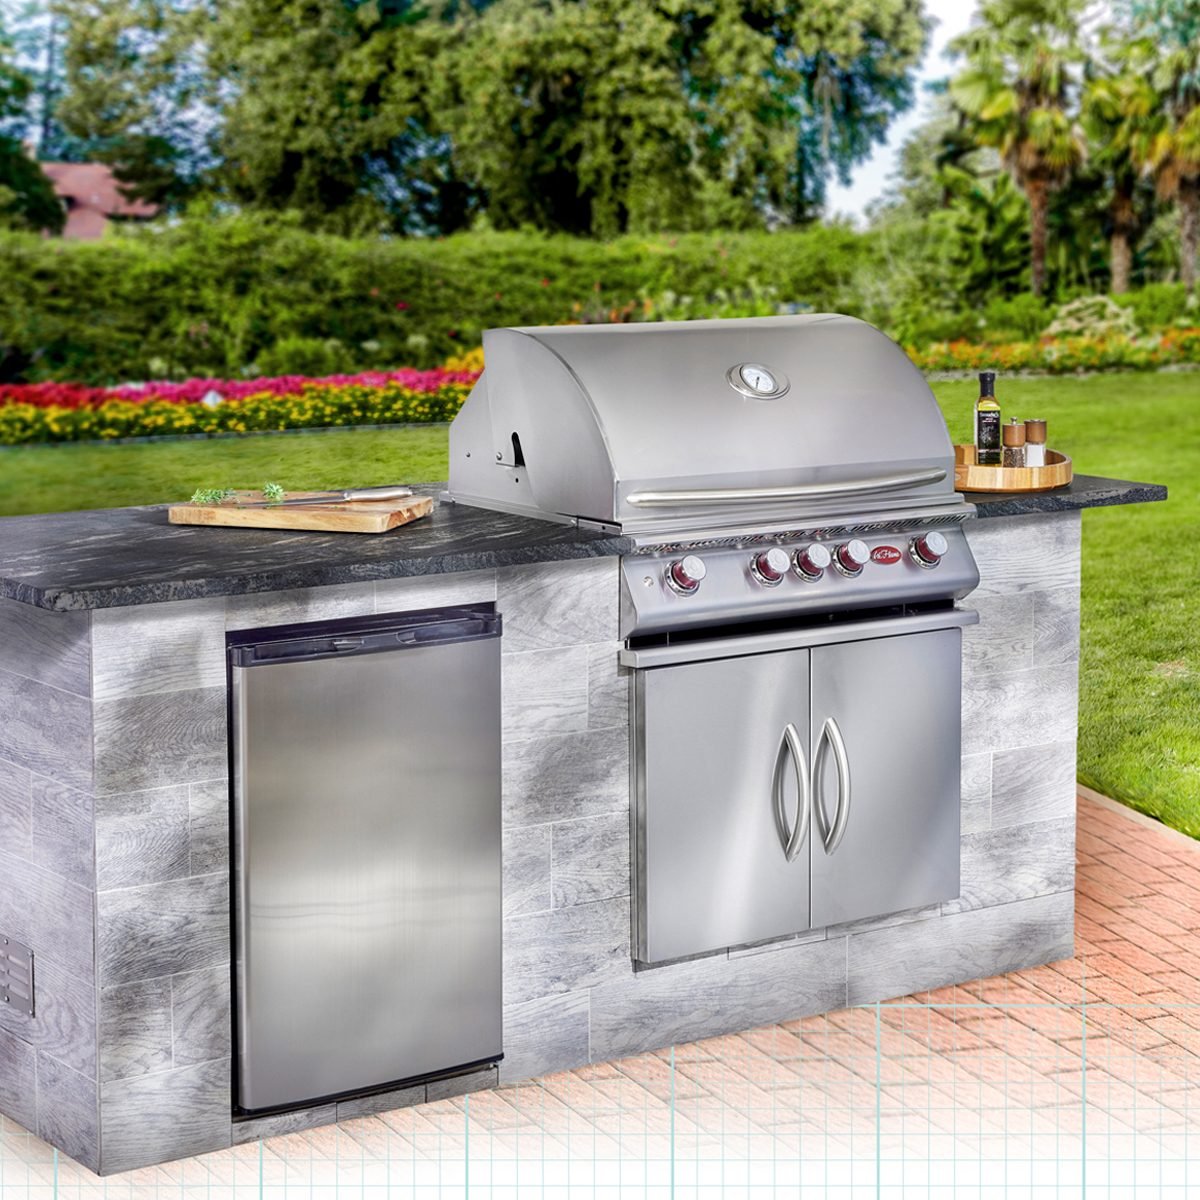 How to Plan and Build an Outdoor Kitchen